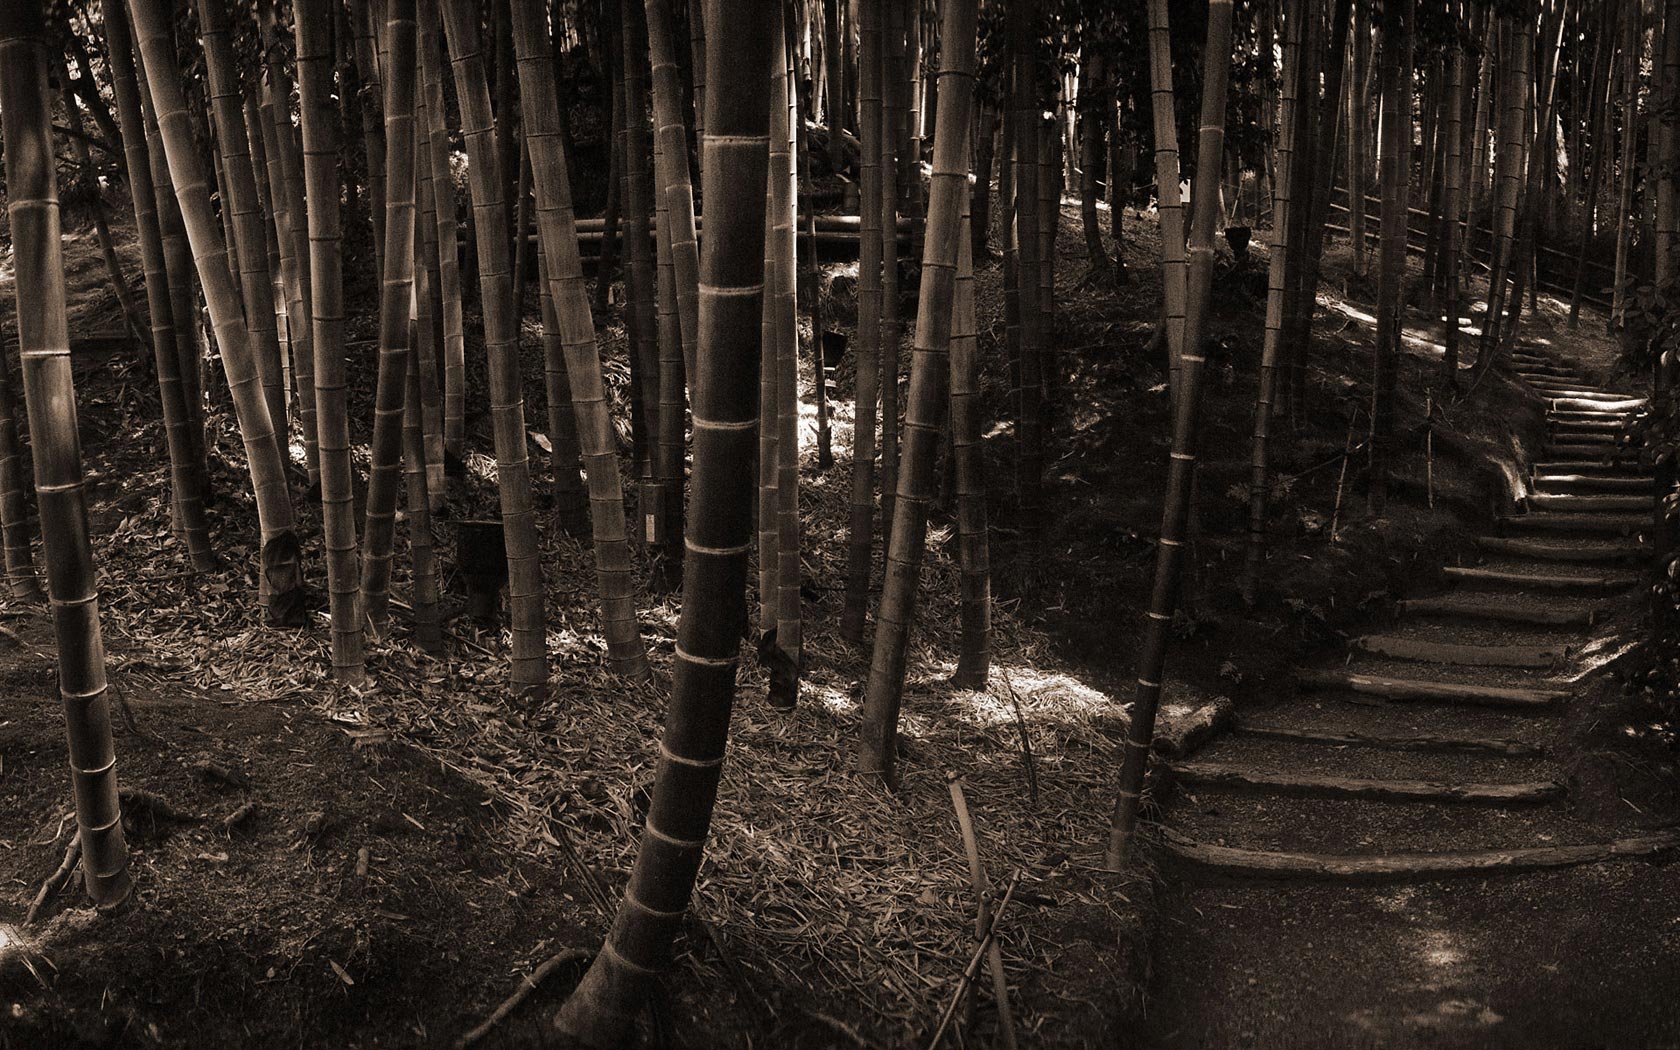 Previous, Nature - Forest - Bamboo forest wallpaper